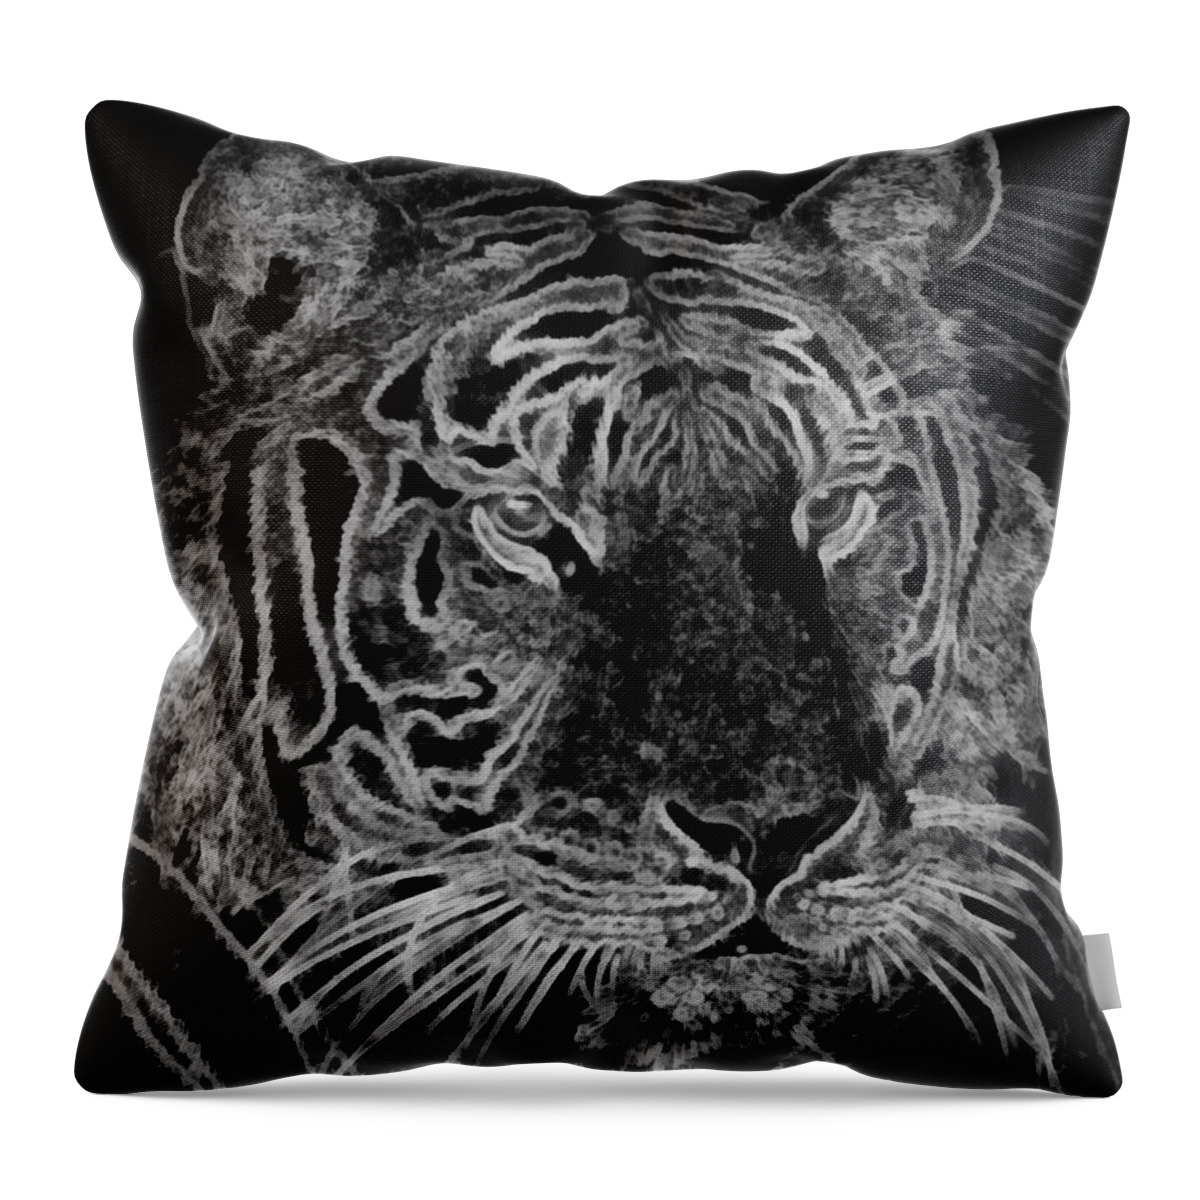 Tiger Throw Pillow featuring the digital art Tiger by Humphrey Isselt